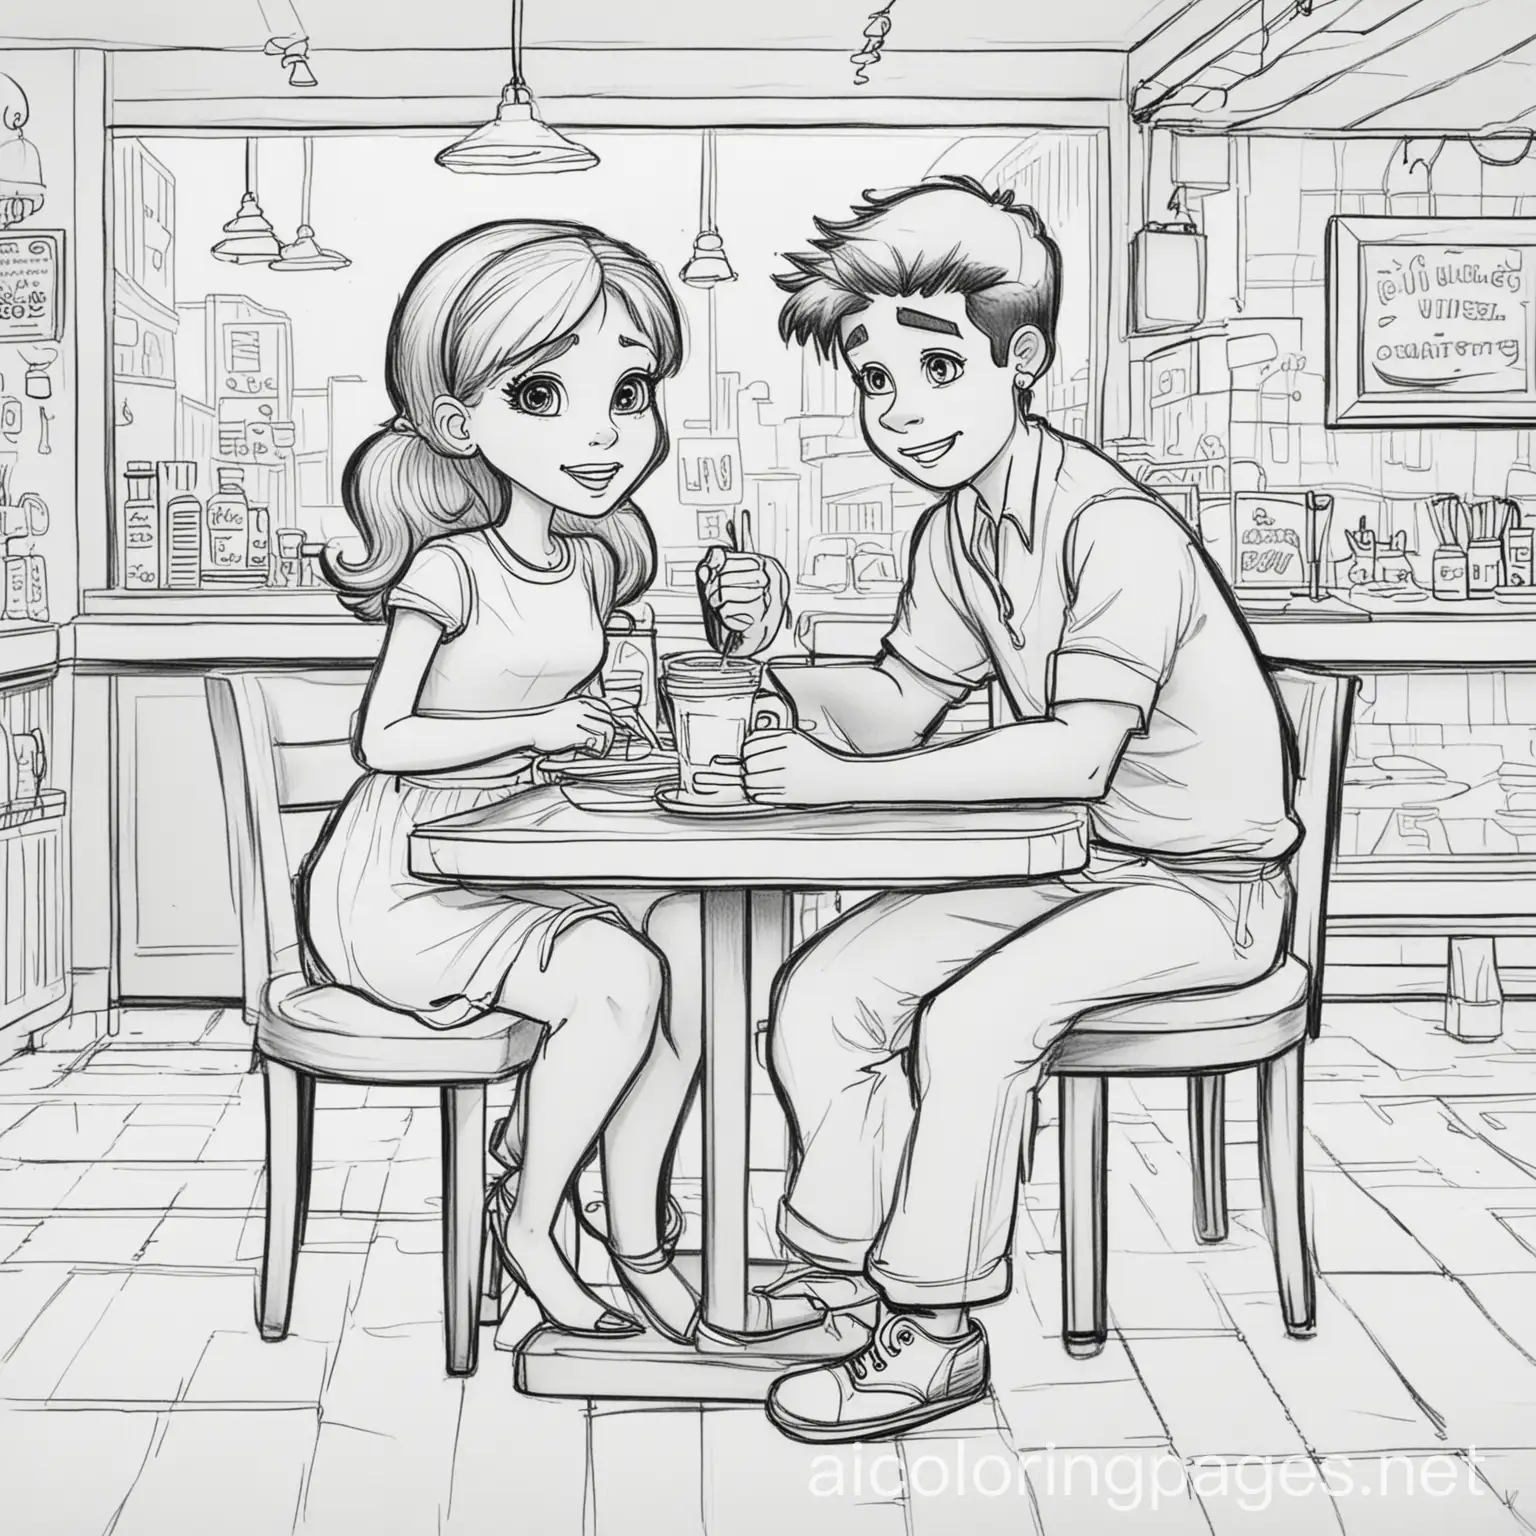 Quirky-Diner-Date-Cartoon-Boy-and-Girl-at-a-Unique-Ghetto-Eatery